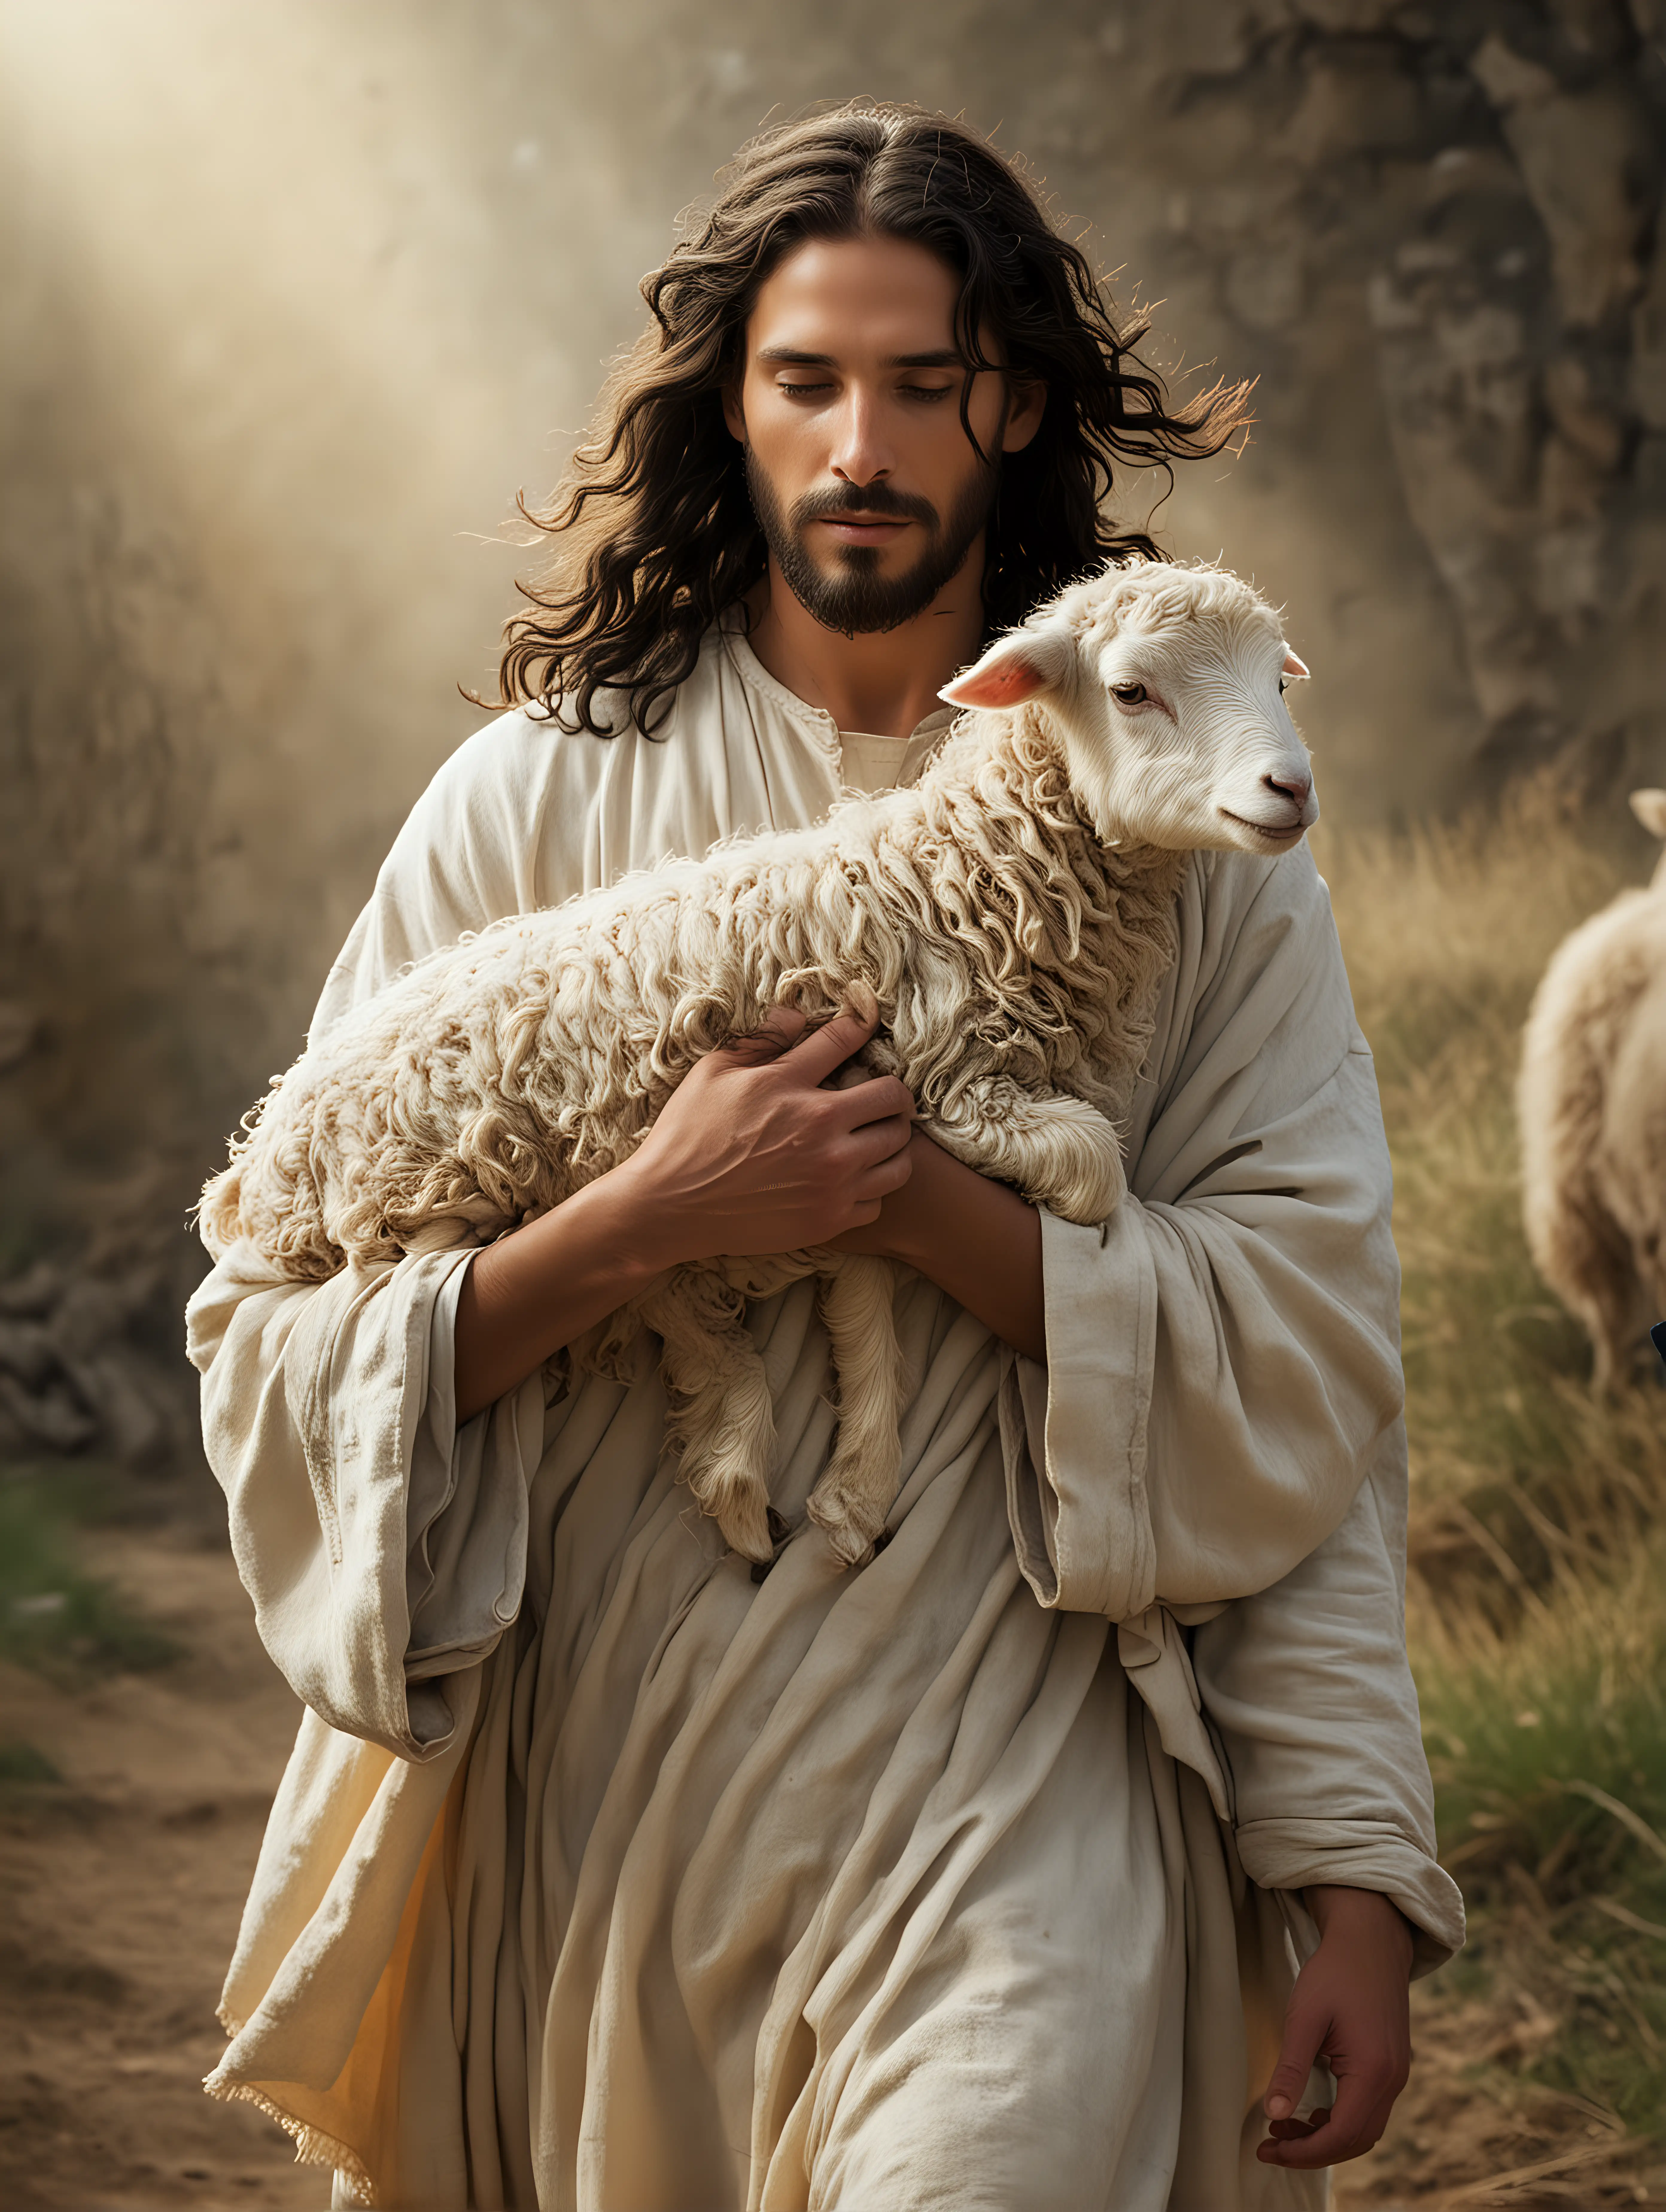 Jesus Carrying a Lamb Religious Figure with Long Dark Wavy Hair